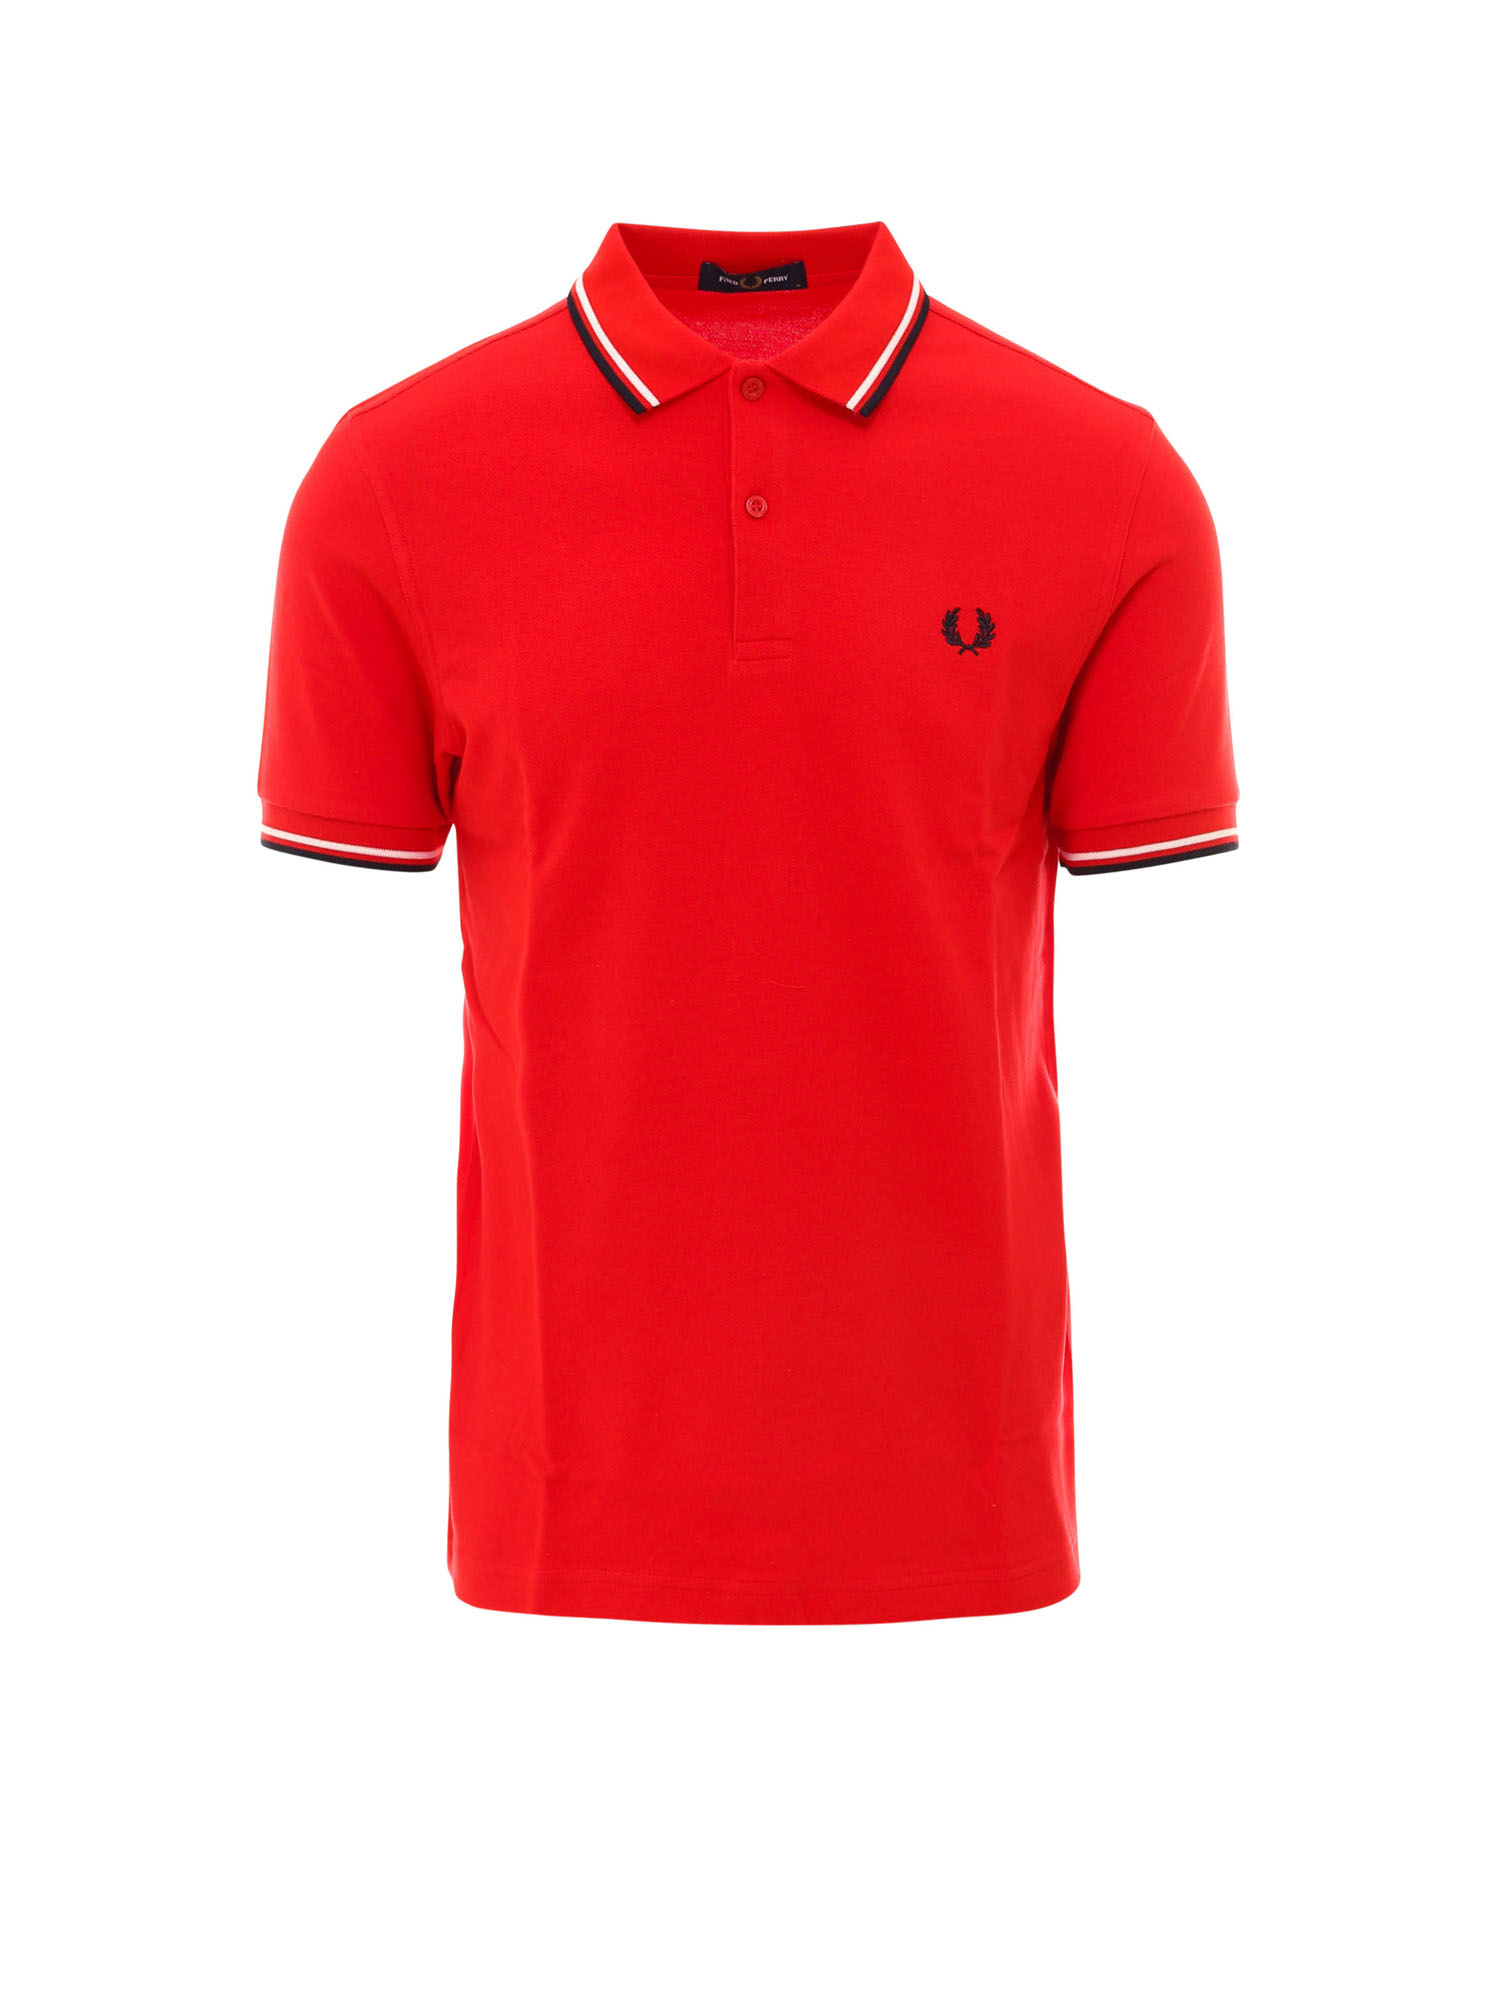 FRED PERRY POLO SHIRT,FPM360037 C73